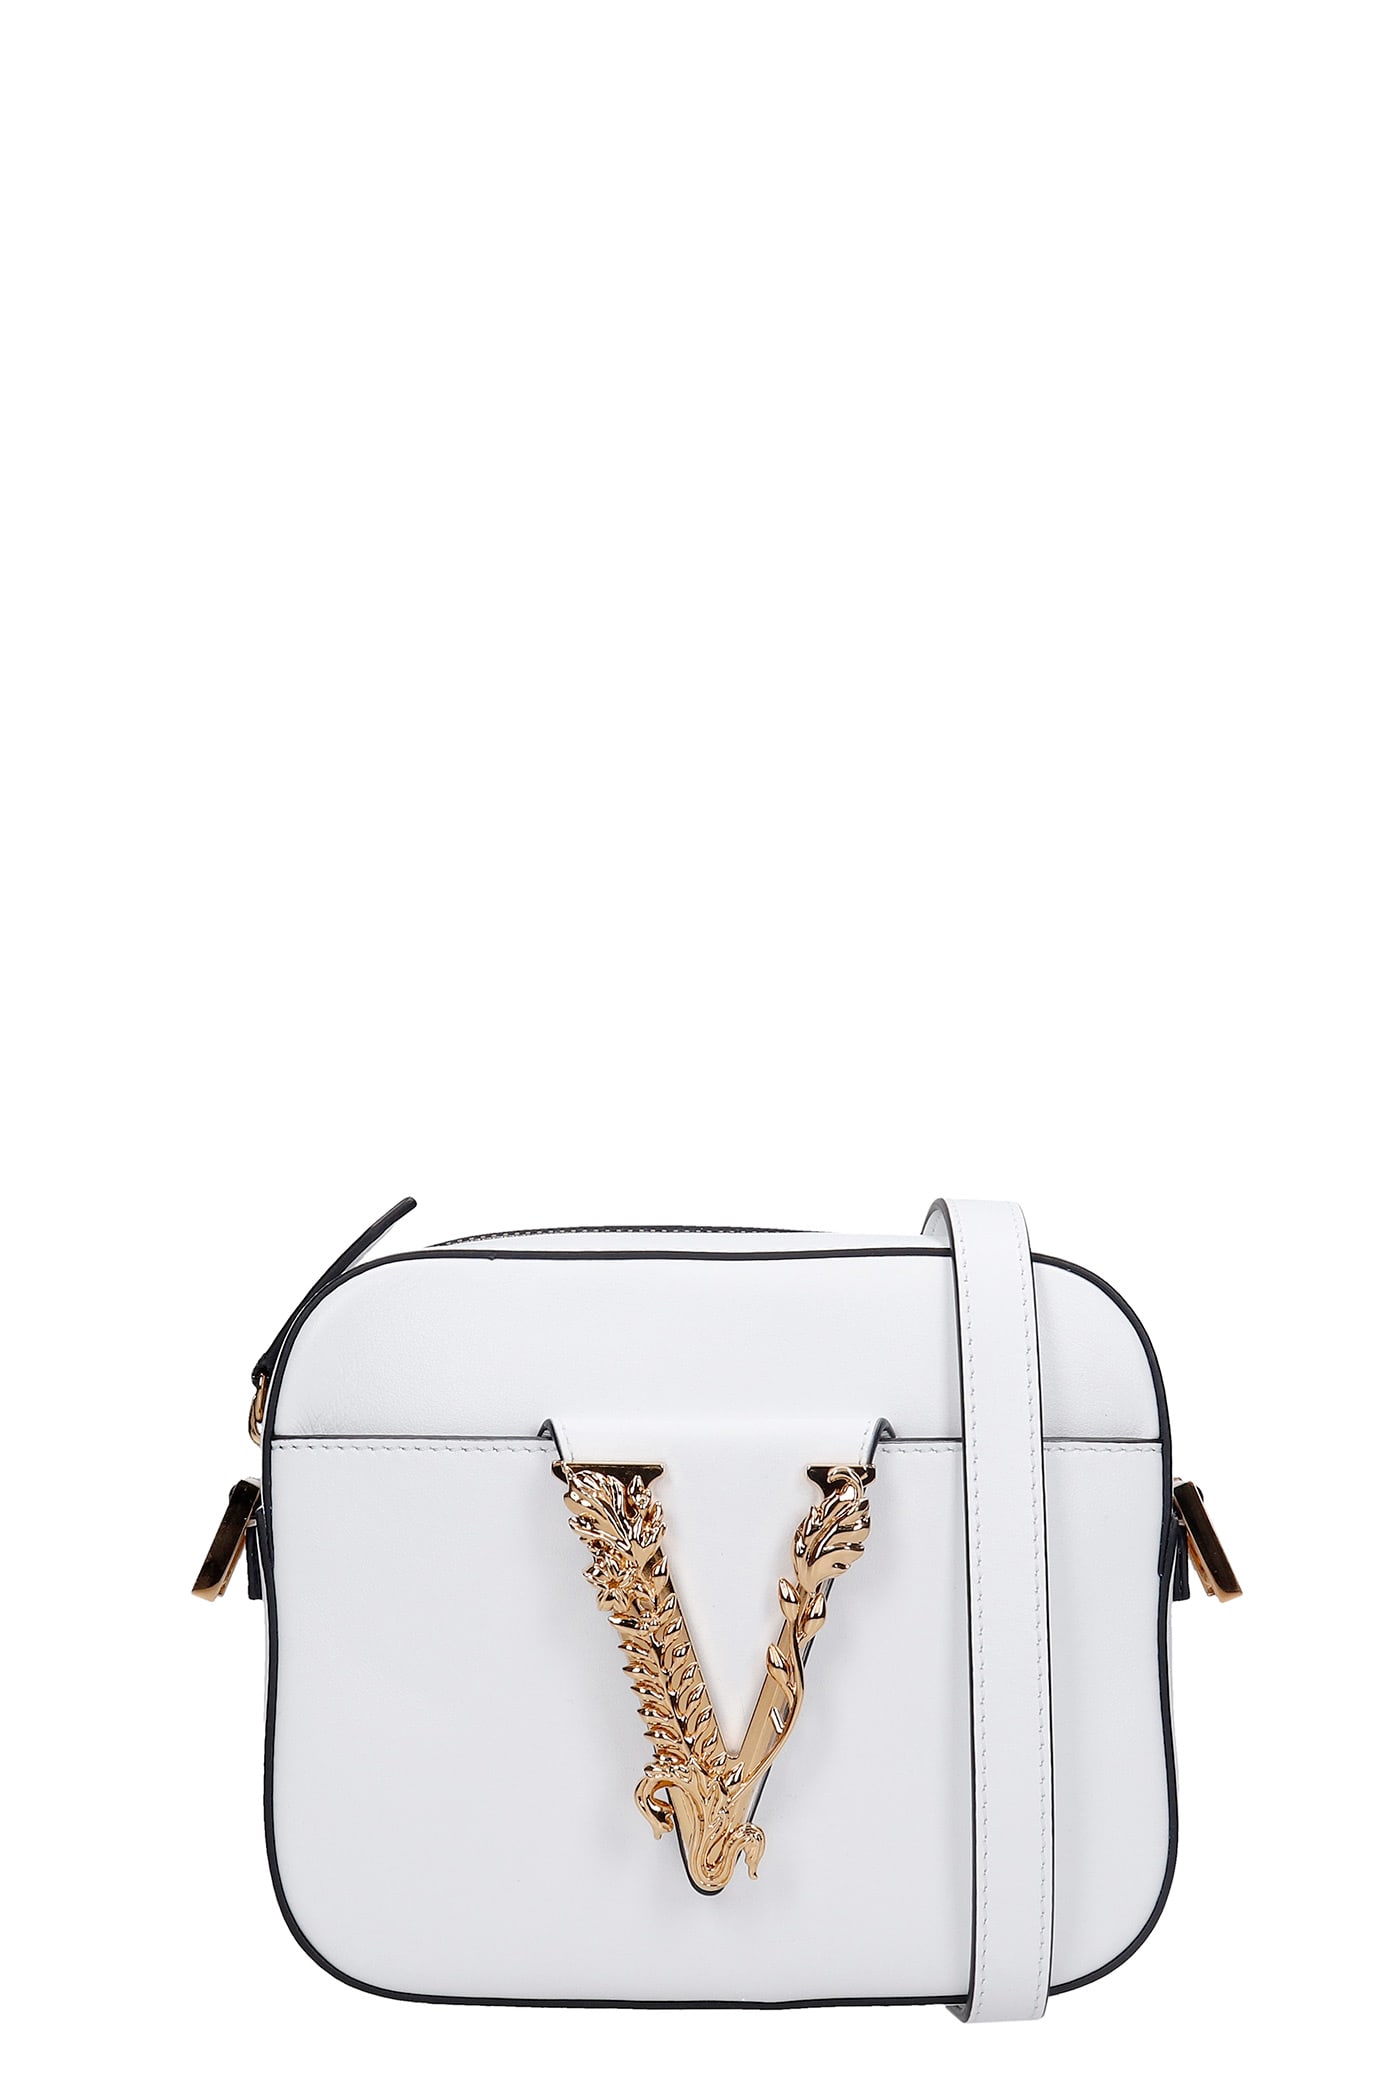 VERSACE SHOULDER BAG IN WHITE LEATHER,11777393